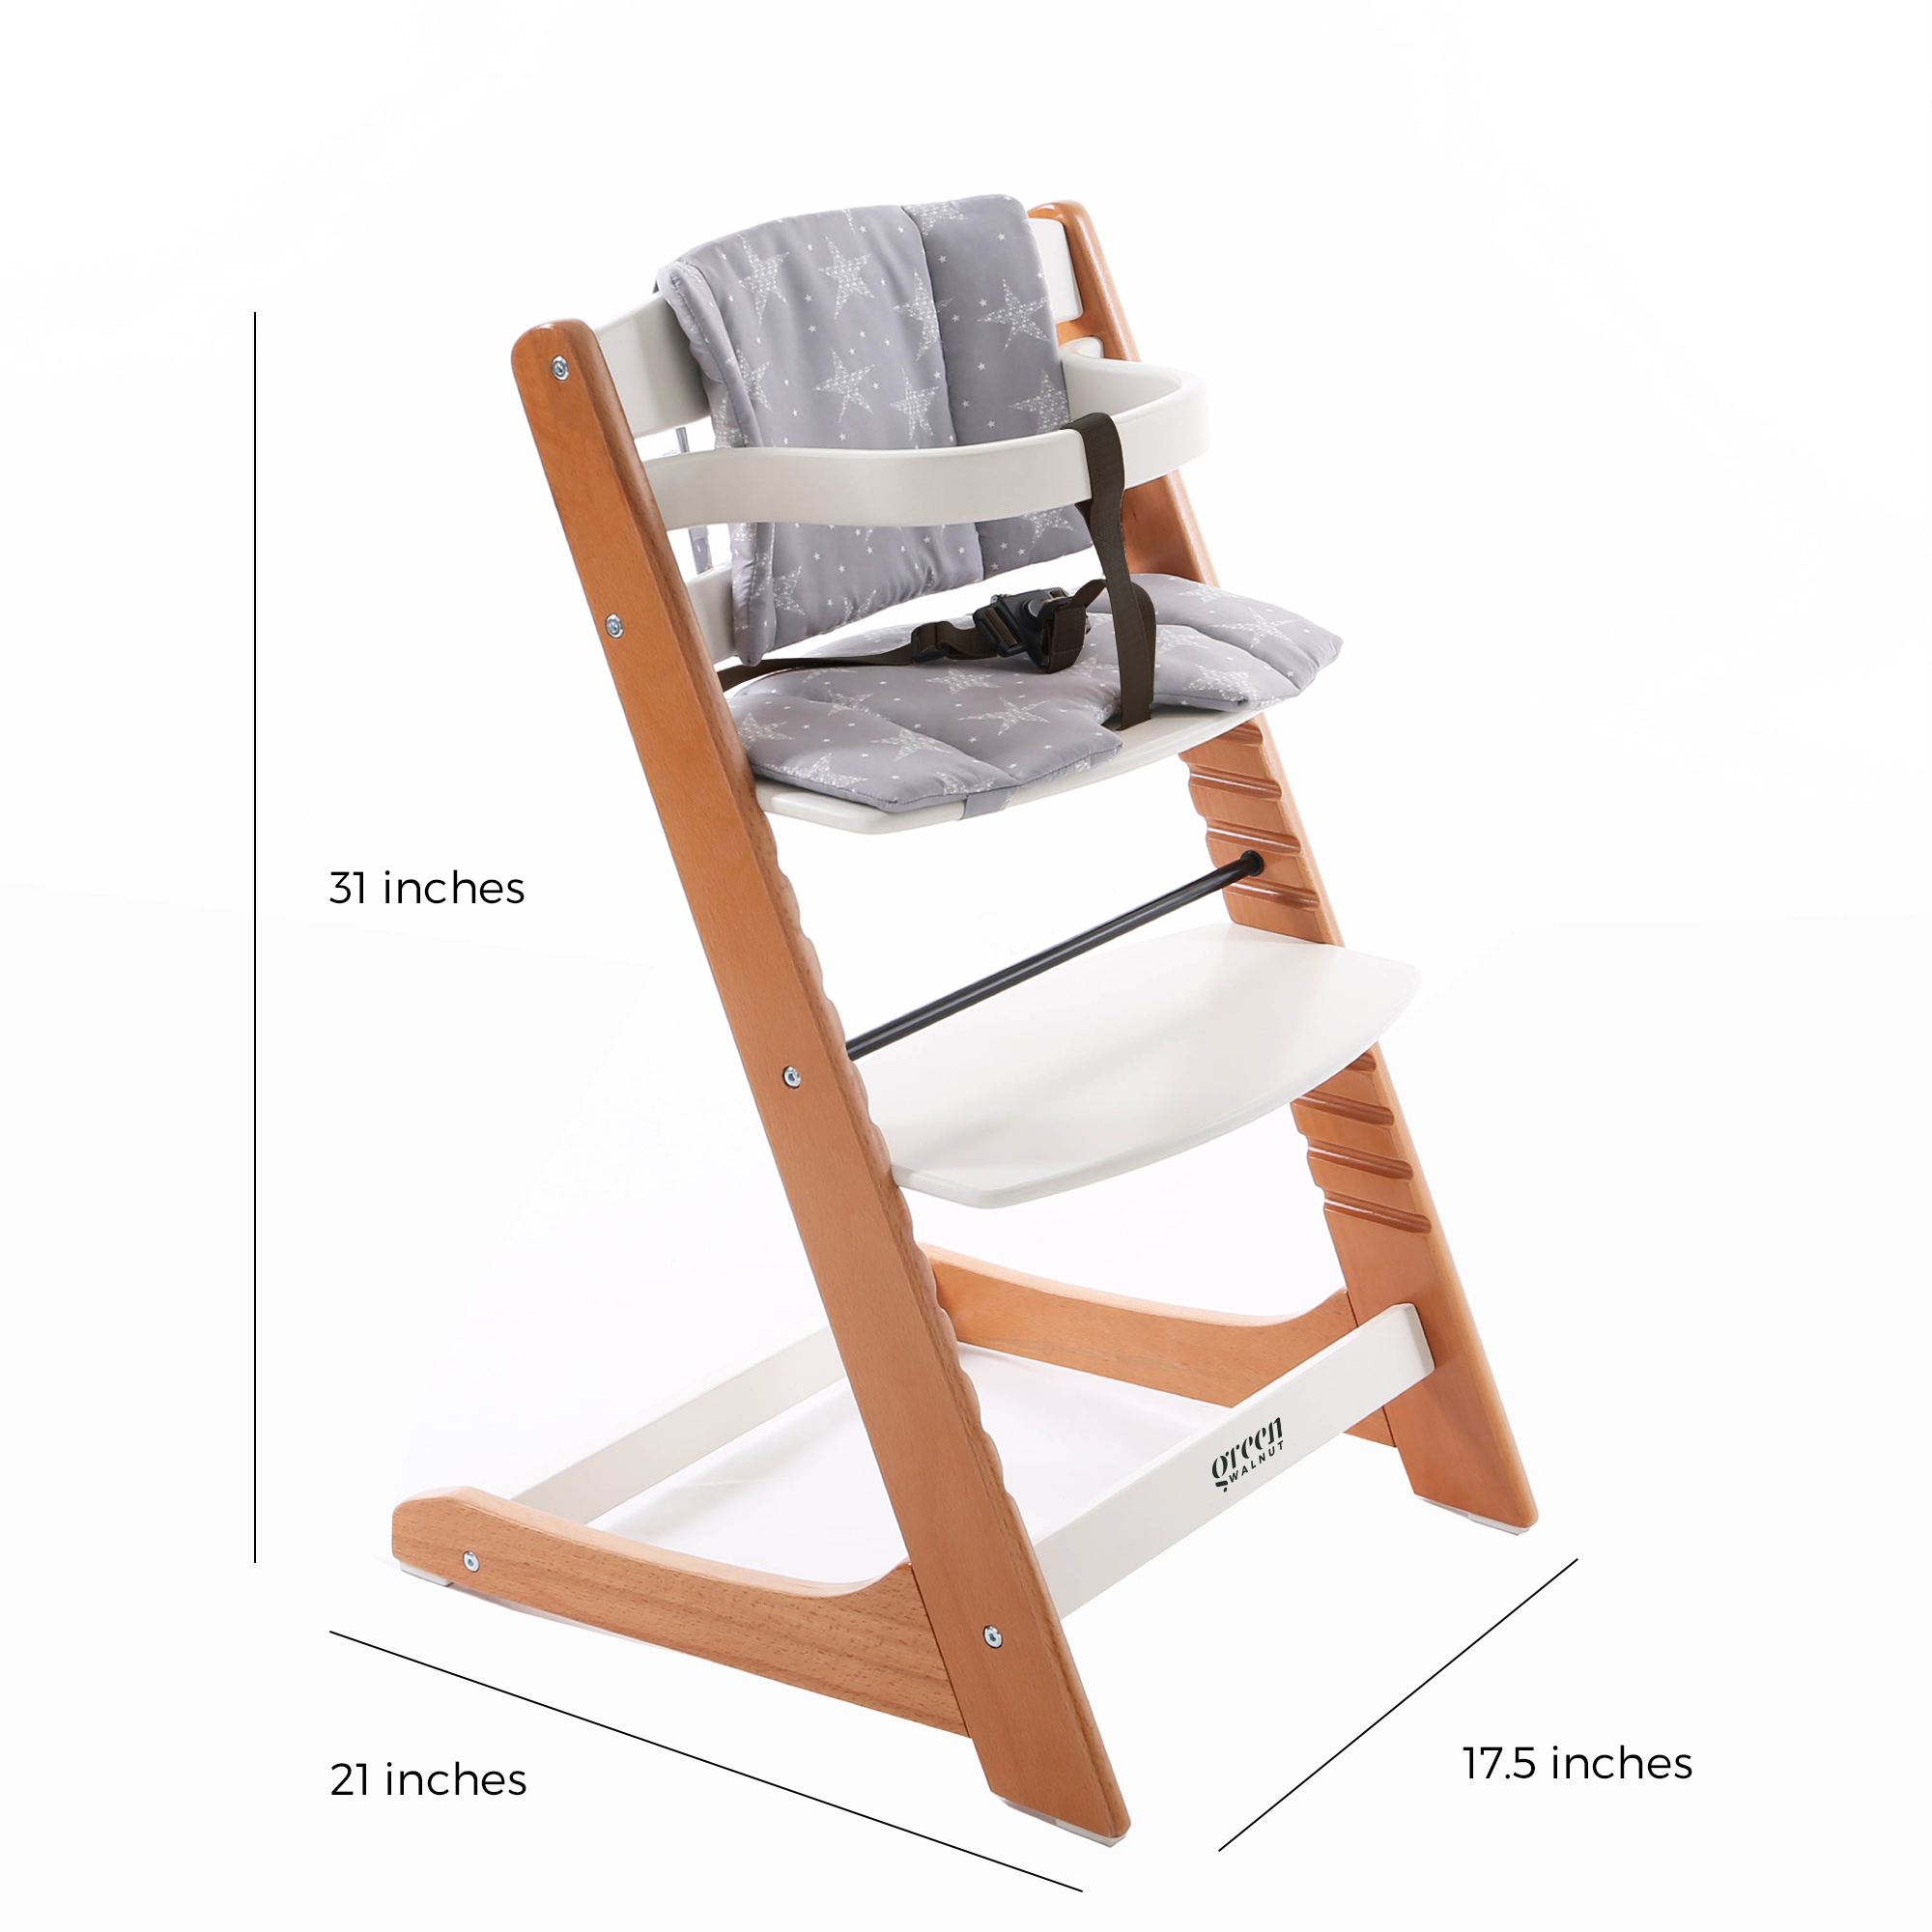 Wooden High Chair For Babies And Toddlers | Includes ( Seat Cushion ,tray & 5 Point Belt )